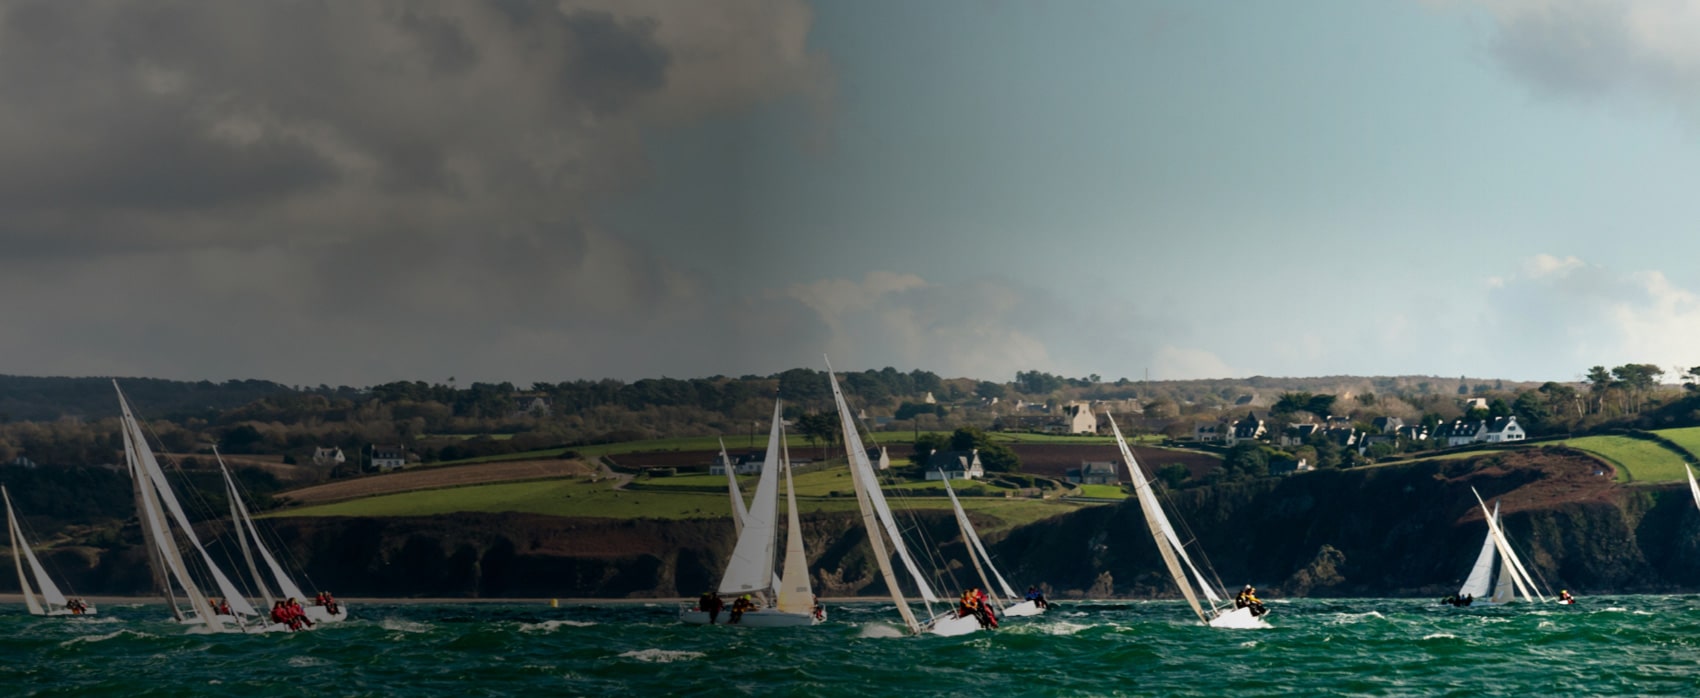 Multiple sailing boats in the water